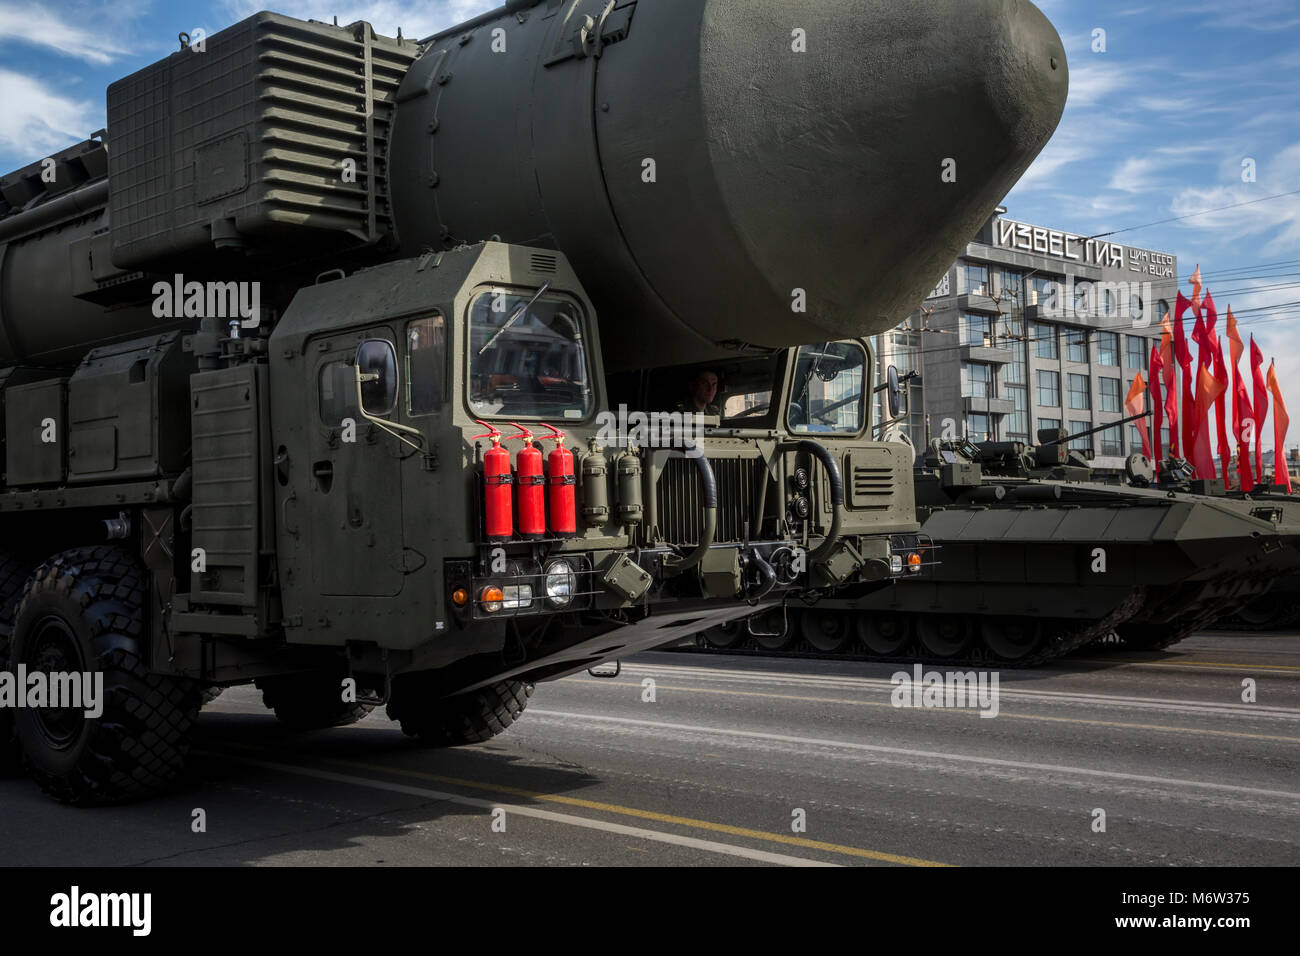 A YARS RS-24 solid propellant inter-continental ballistic missile moves through Moscow's Tverskaya street during a of the May 9 Victory Day Parade Stock Photo